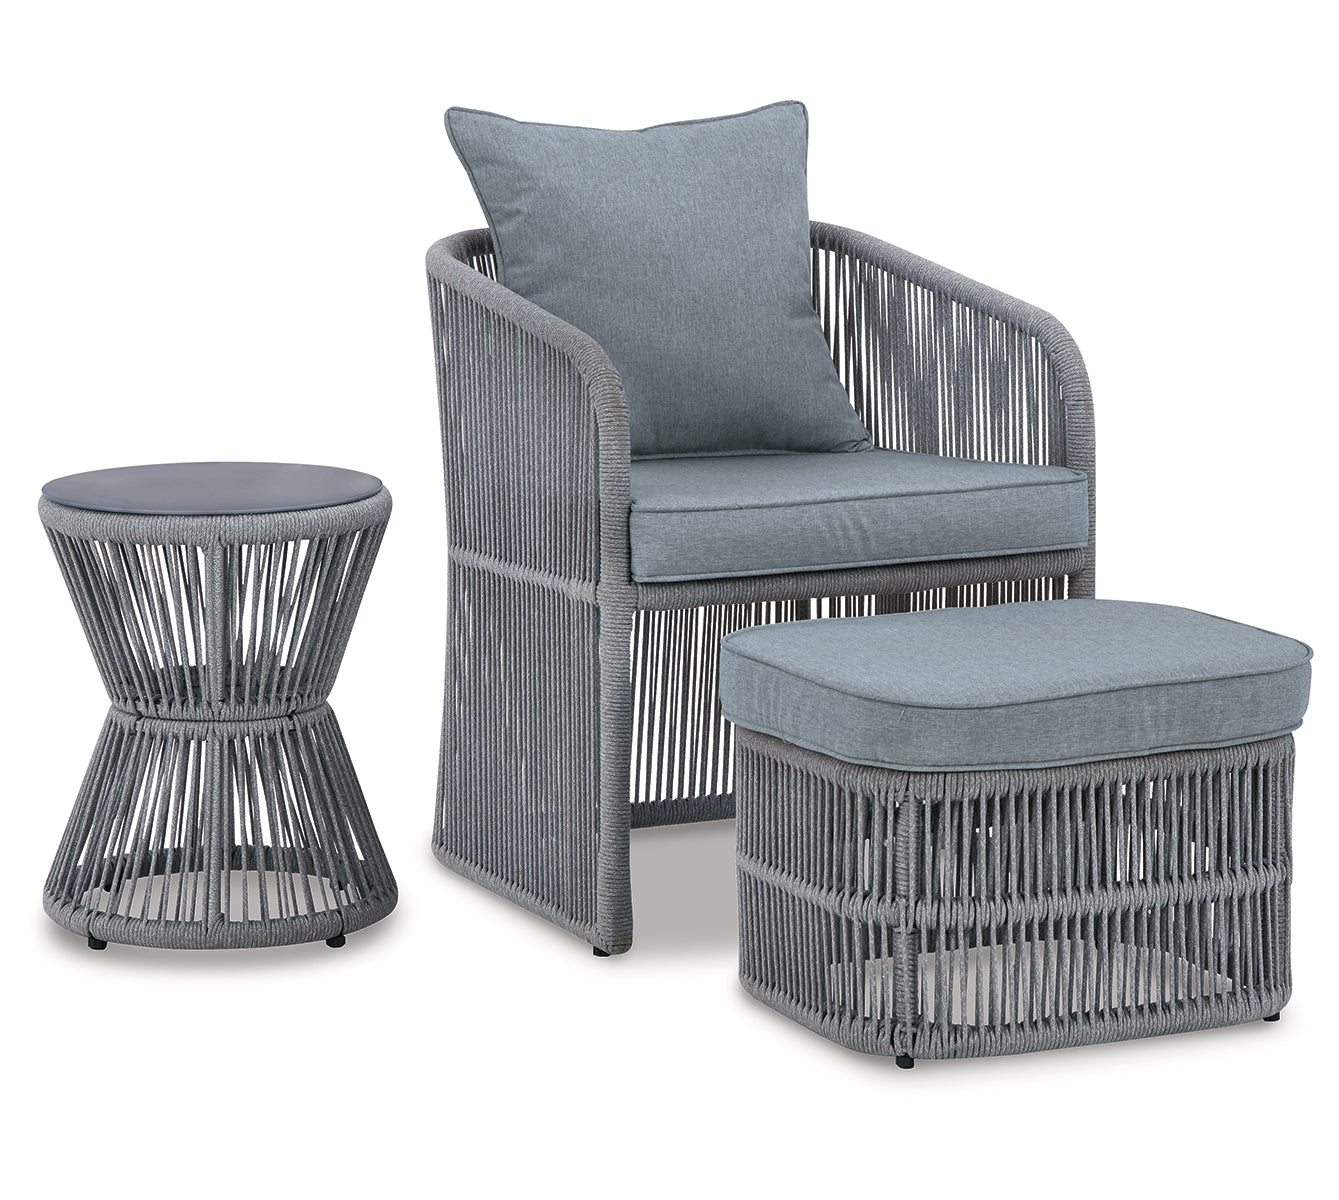 Coast Island Outdoor Chair with Ottoman and Side Table